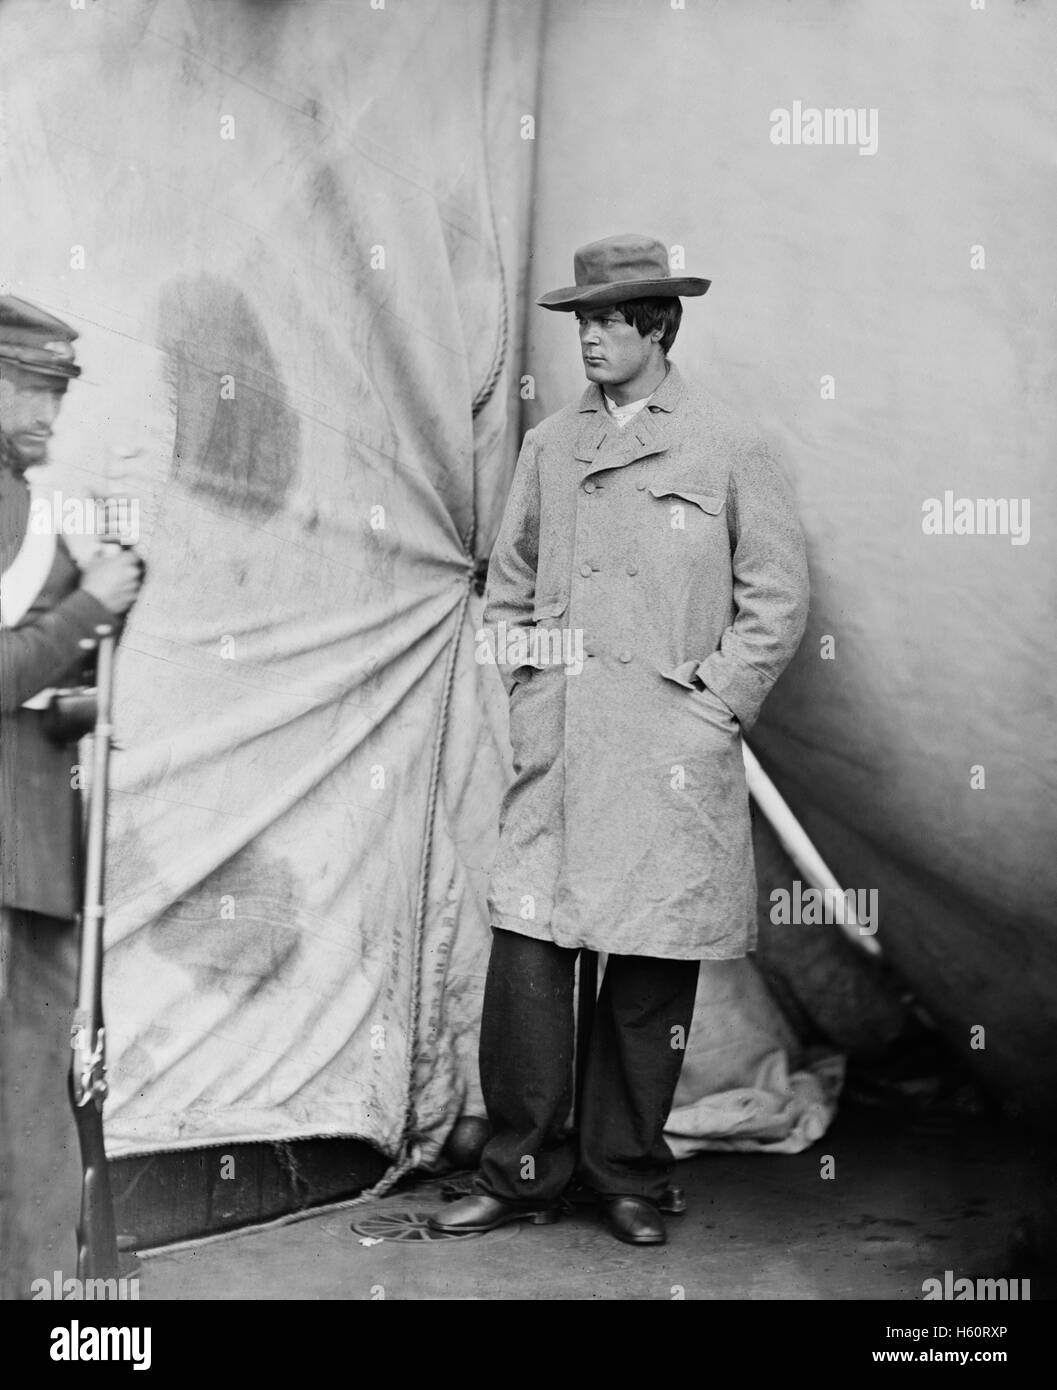 Lewis Powell, also known as Lewis Payne, Attacker of U.S. Secretary of State William H. Seward, and Conspirator in Assassination of U.S. President Abraham Lincoln, Standing in Overcoat with Hat, Washington Navy Yard, Washington DC, USA, by Alexander Gardner, April 1865 Stock Photo